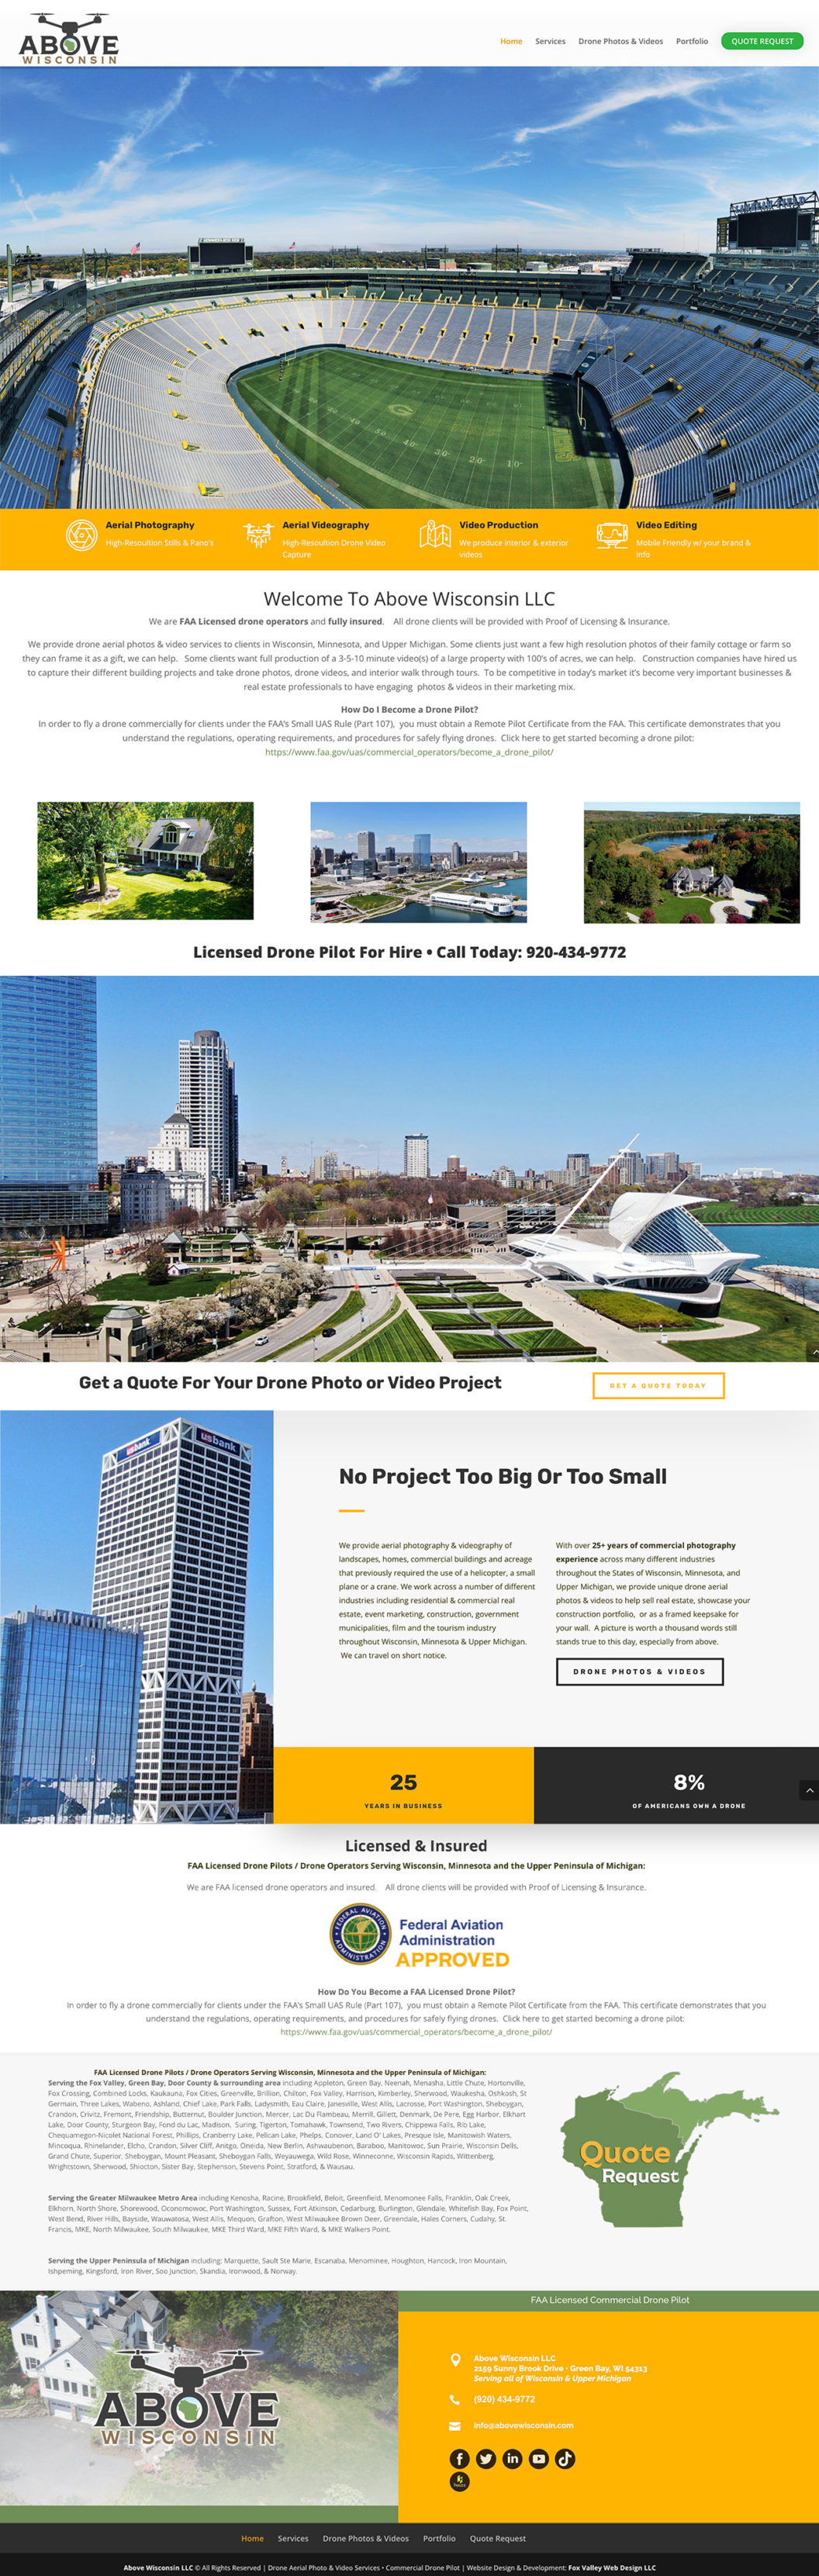 Above Wisconsin LLC • Green Bay Pilot For Hire Wisconsin Drone Company - Fox Valley Web Design